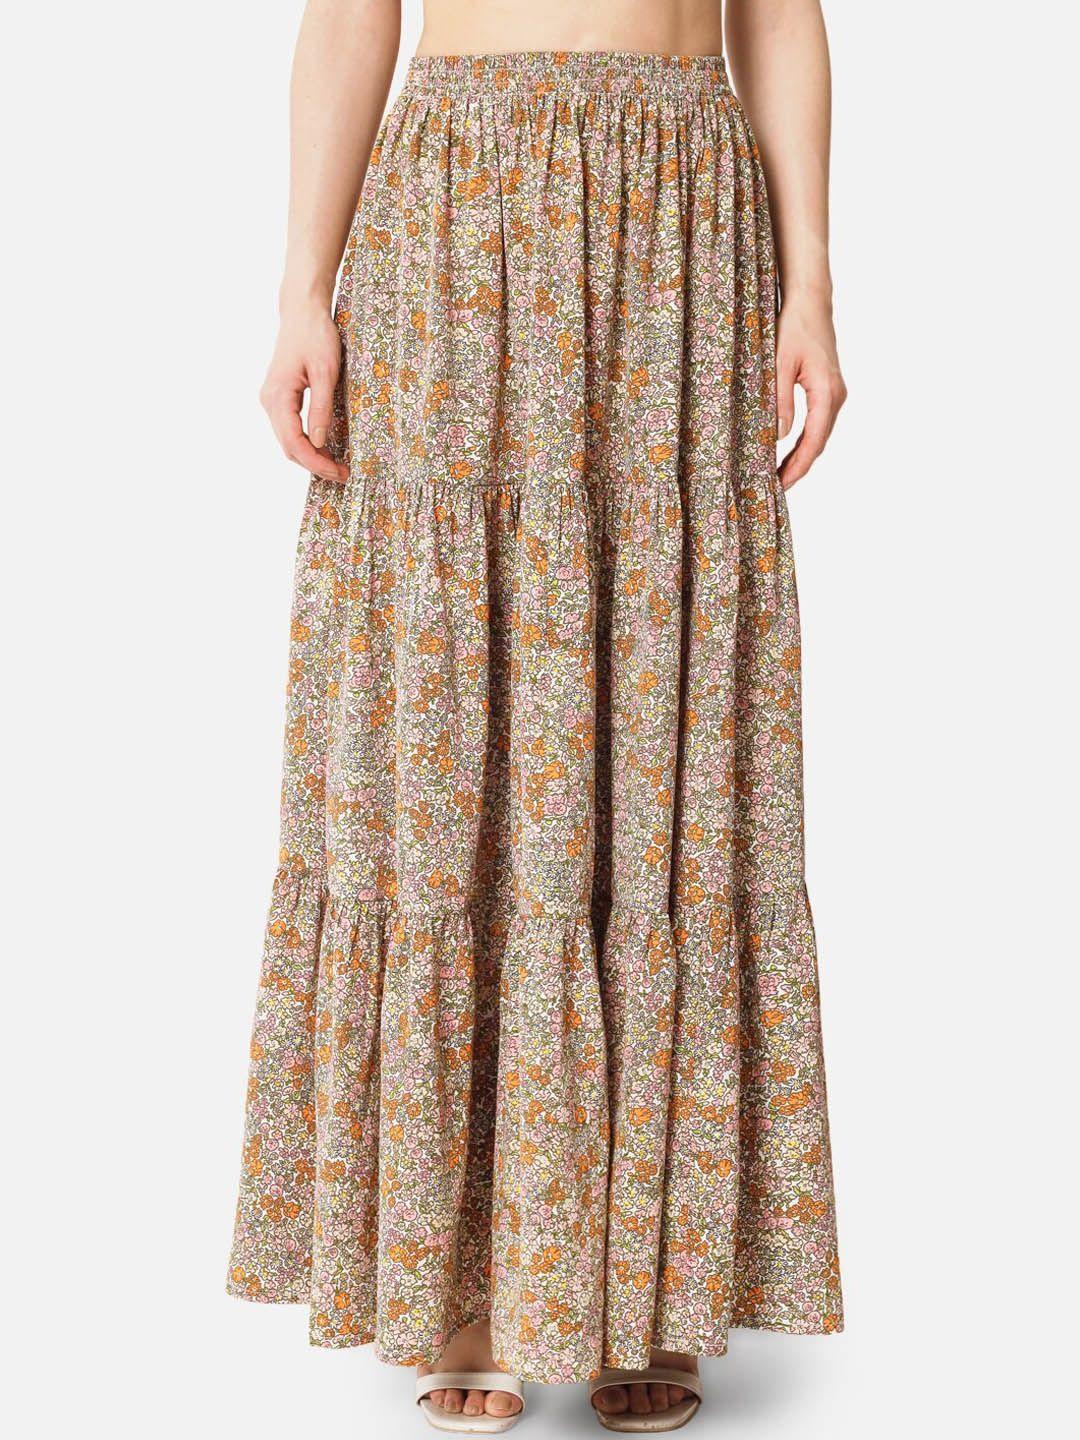 baesd floral printed maxi flared skirt